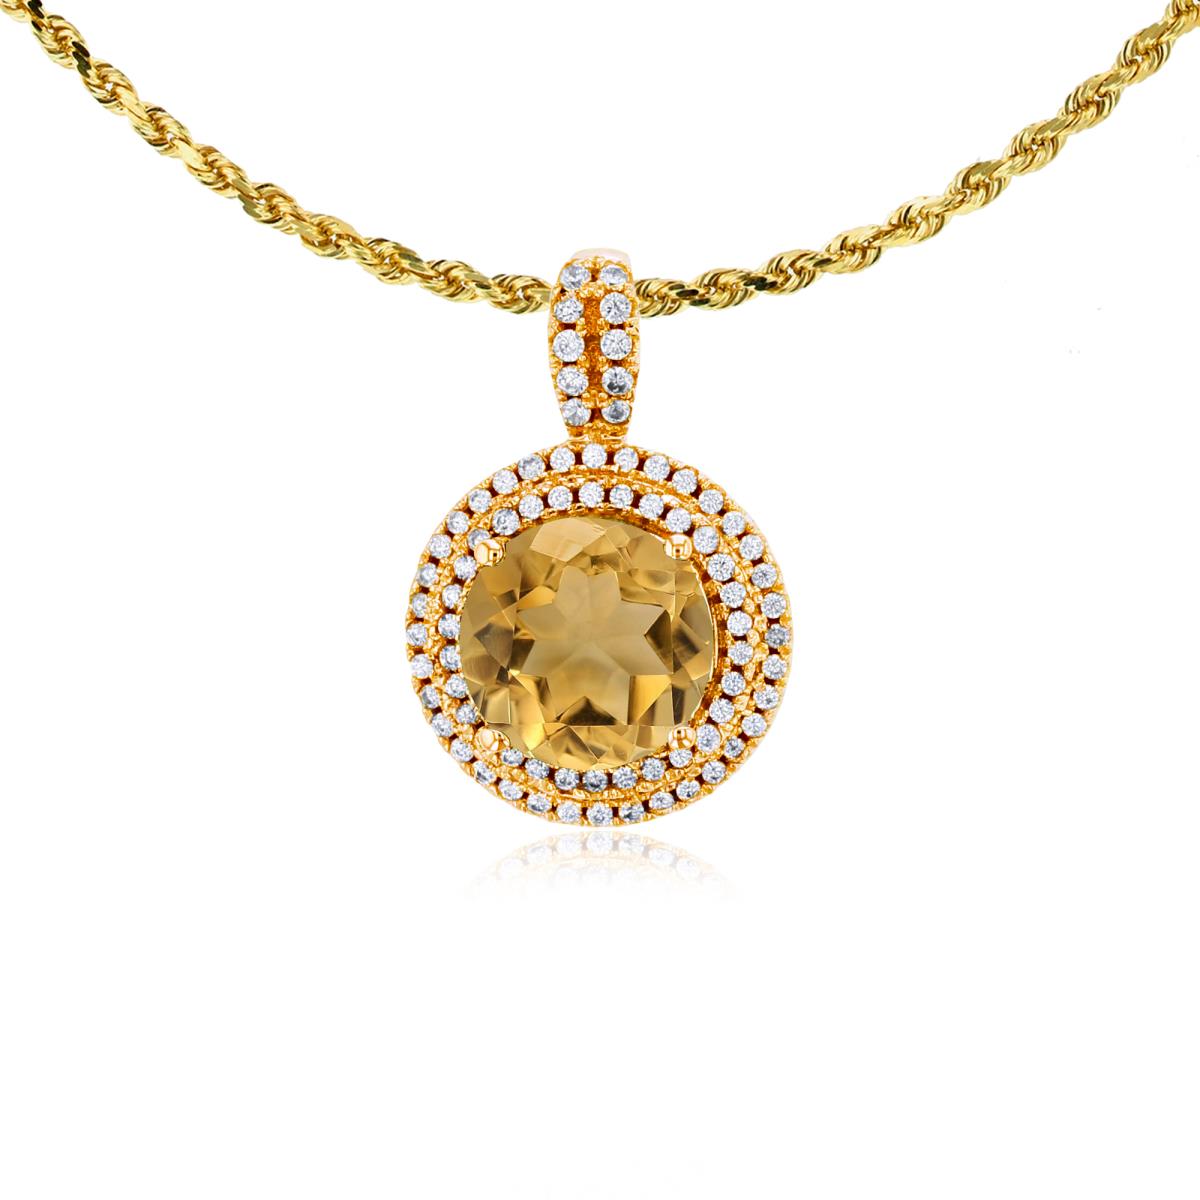 10K Yellow Gold 7mm Round Citrine & 0.25 CTTW Diamonds Double Halo 18" Rope Chain Necklace